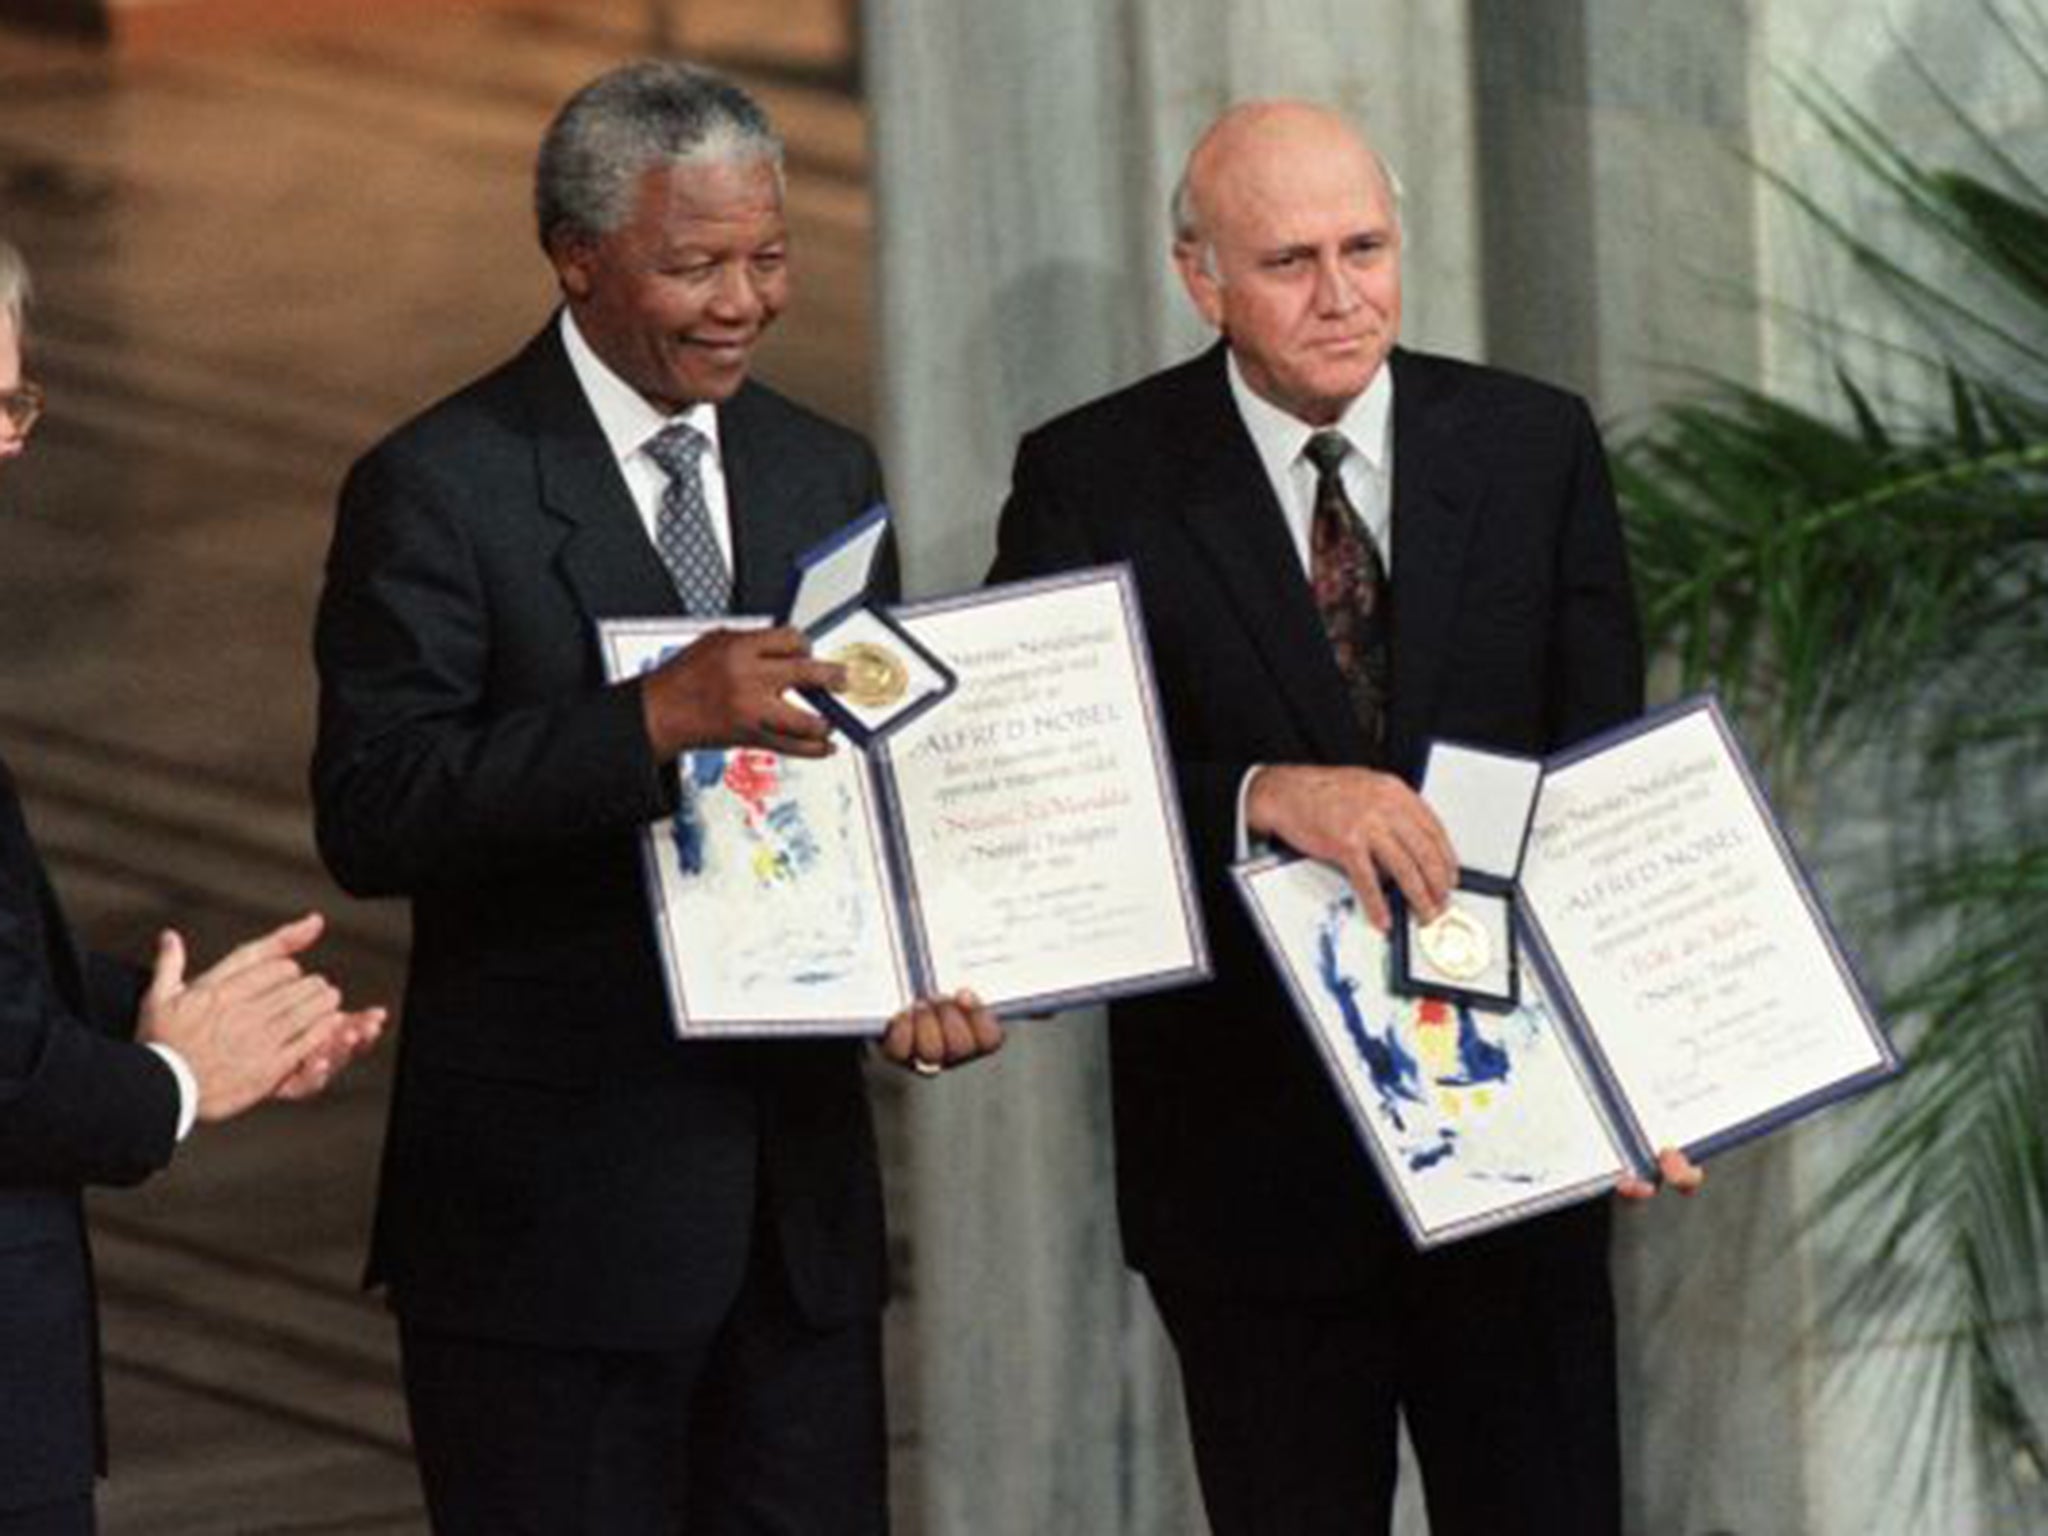 Nelson Mandela, then President of South African African National Congress, and South African President Frederik de Klerk were awarded the peace prize in 1993 for their work to end apartheid peacefully